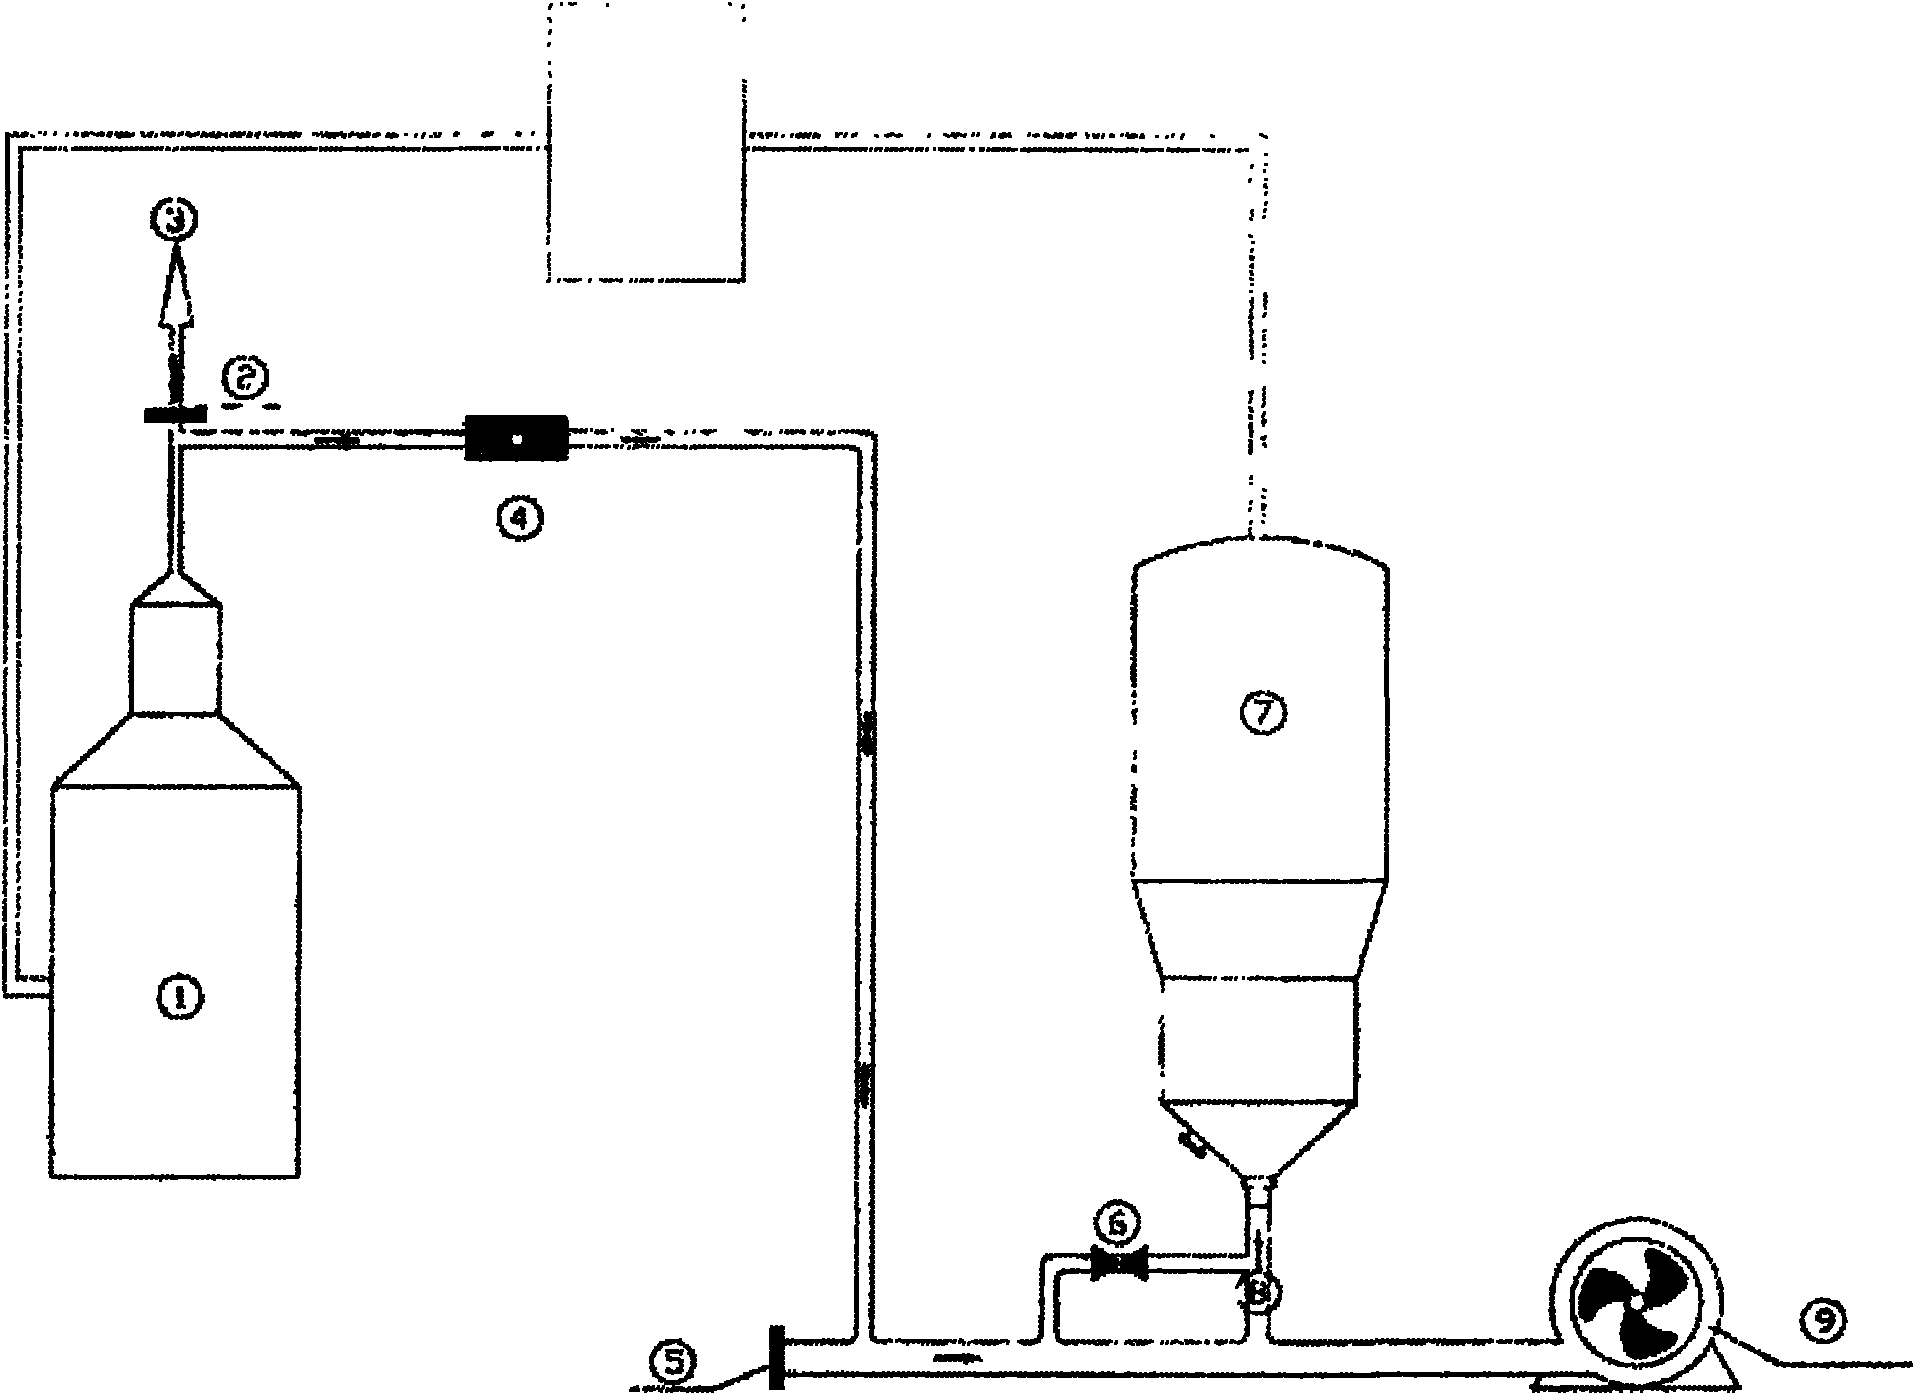 Recycling method of tail gas from pyrolusite reduction and sulfuric acid coproduction in fluidized bed furnace